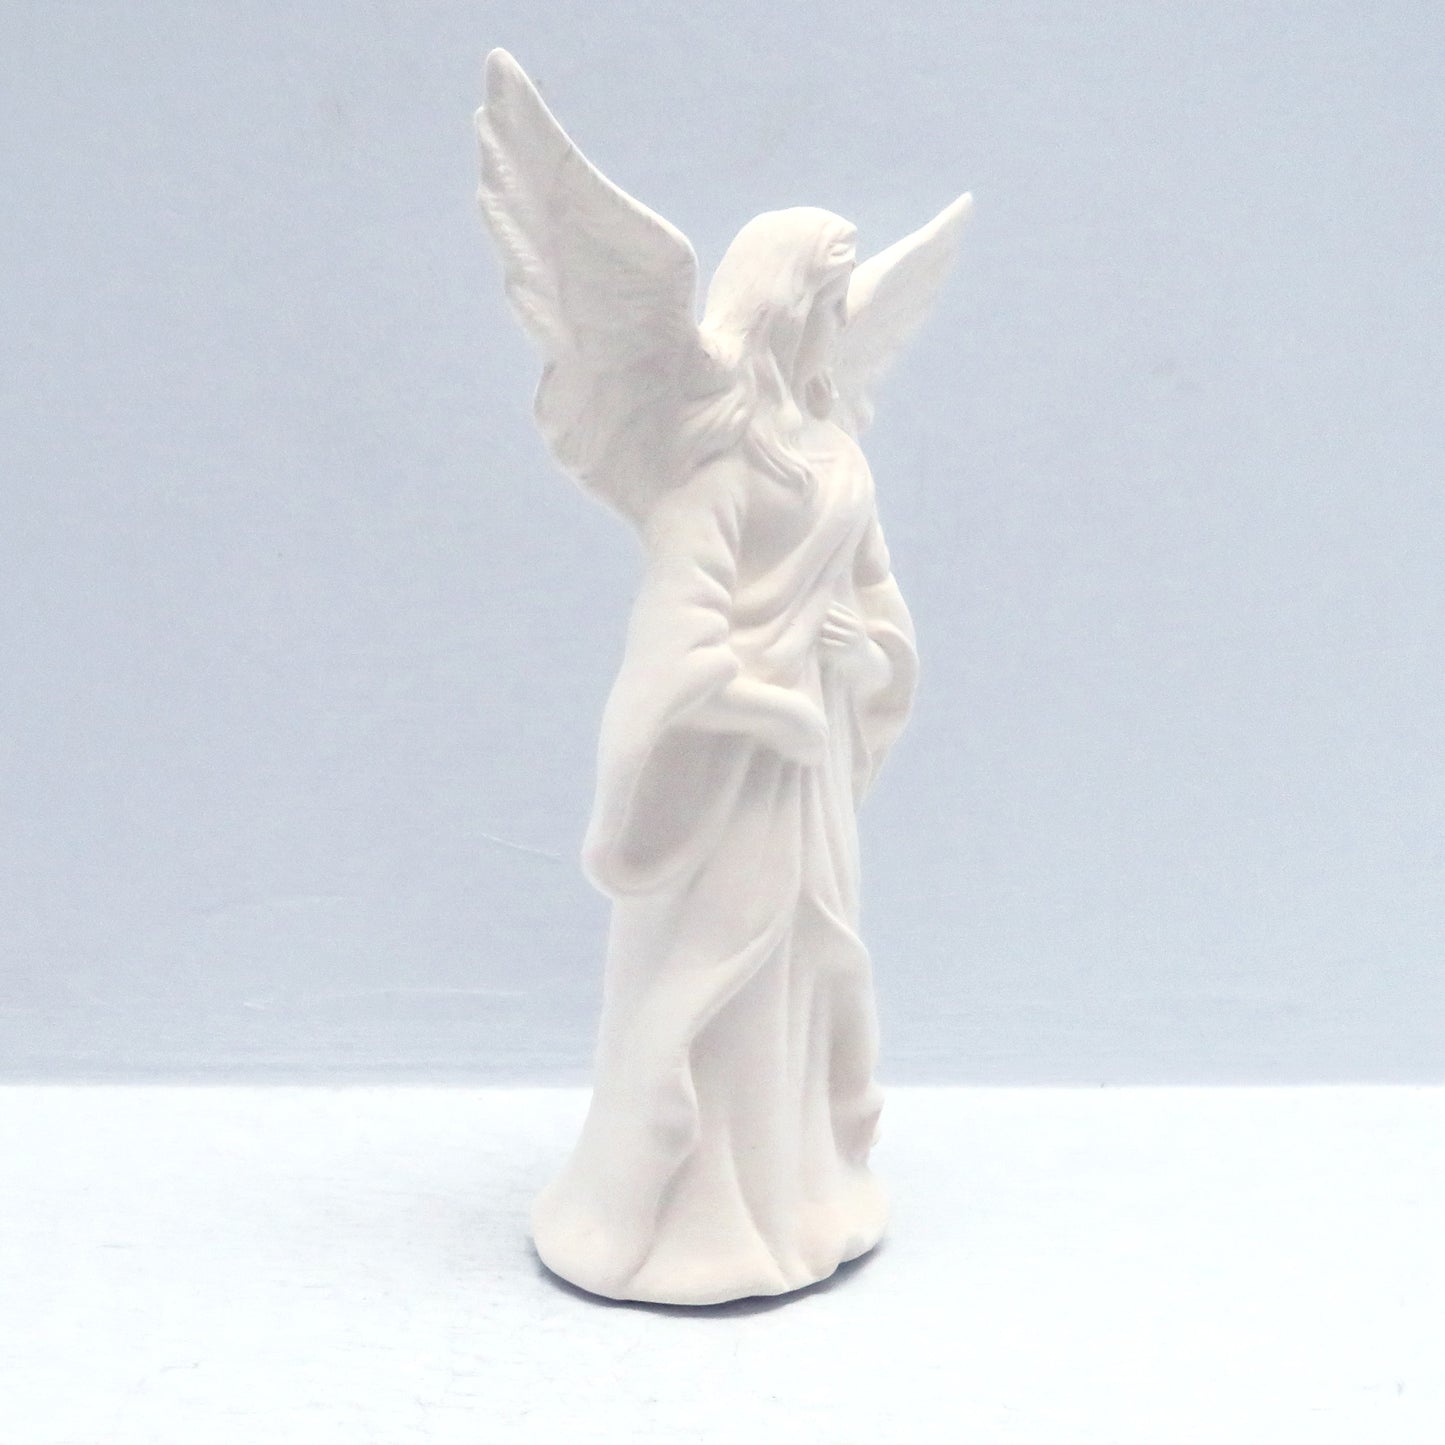 Unpainted Ceramic Bisque Angel Figurine / Angel With Wings Up / Ready to Paint / Ceramics to Paint / Angel Statue / Paintable Ceramics